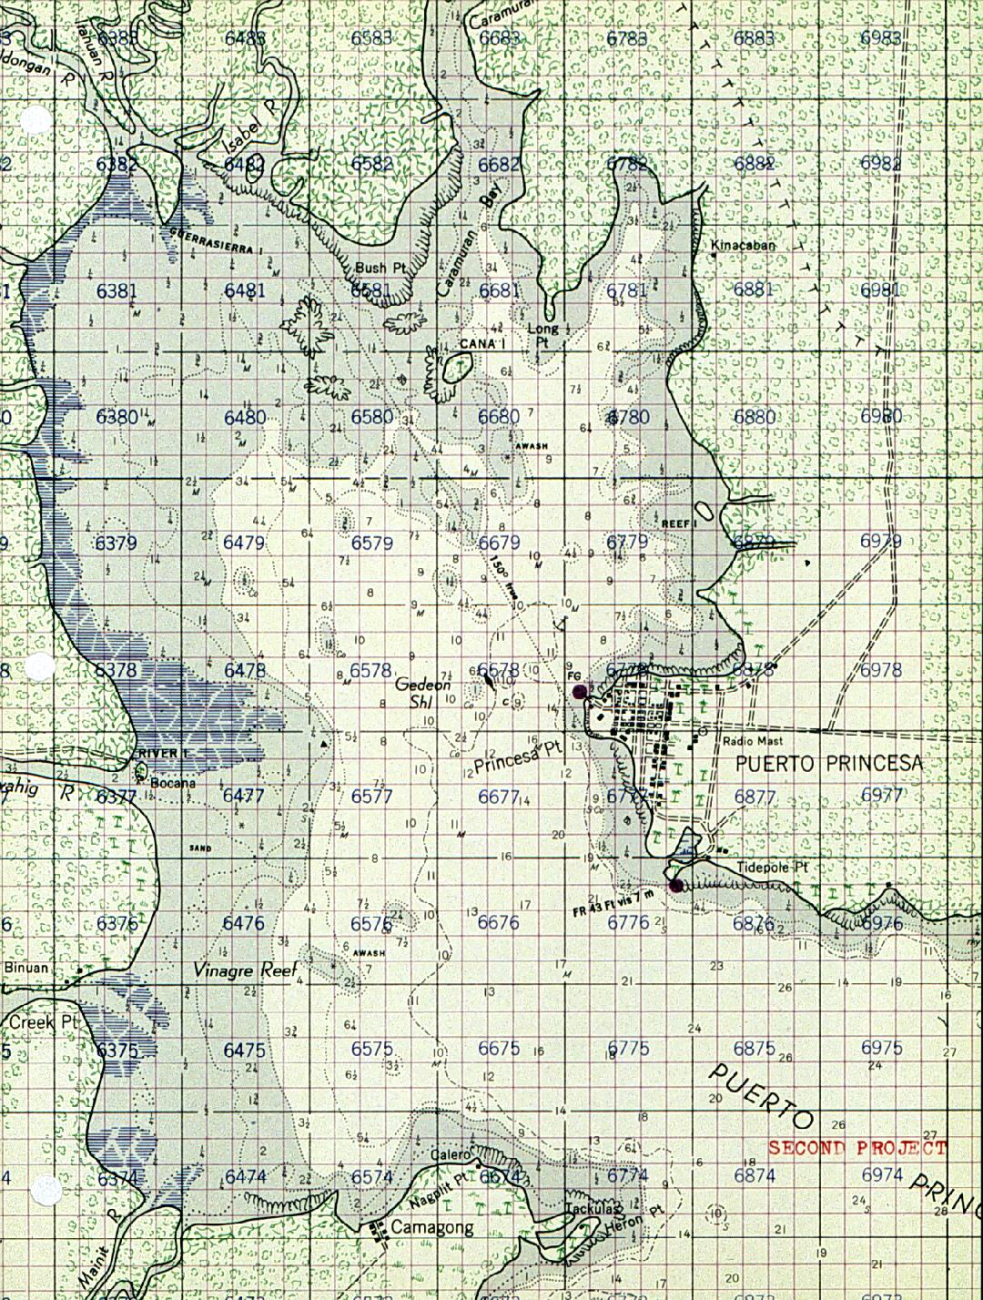 C&GS; Puerto Princesa, Philippines chart with military grid